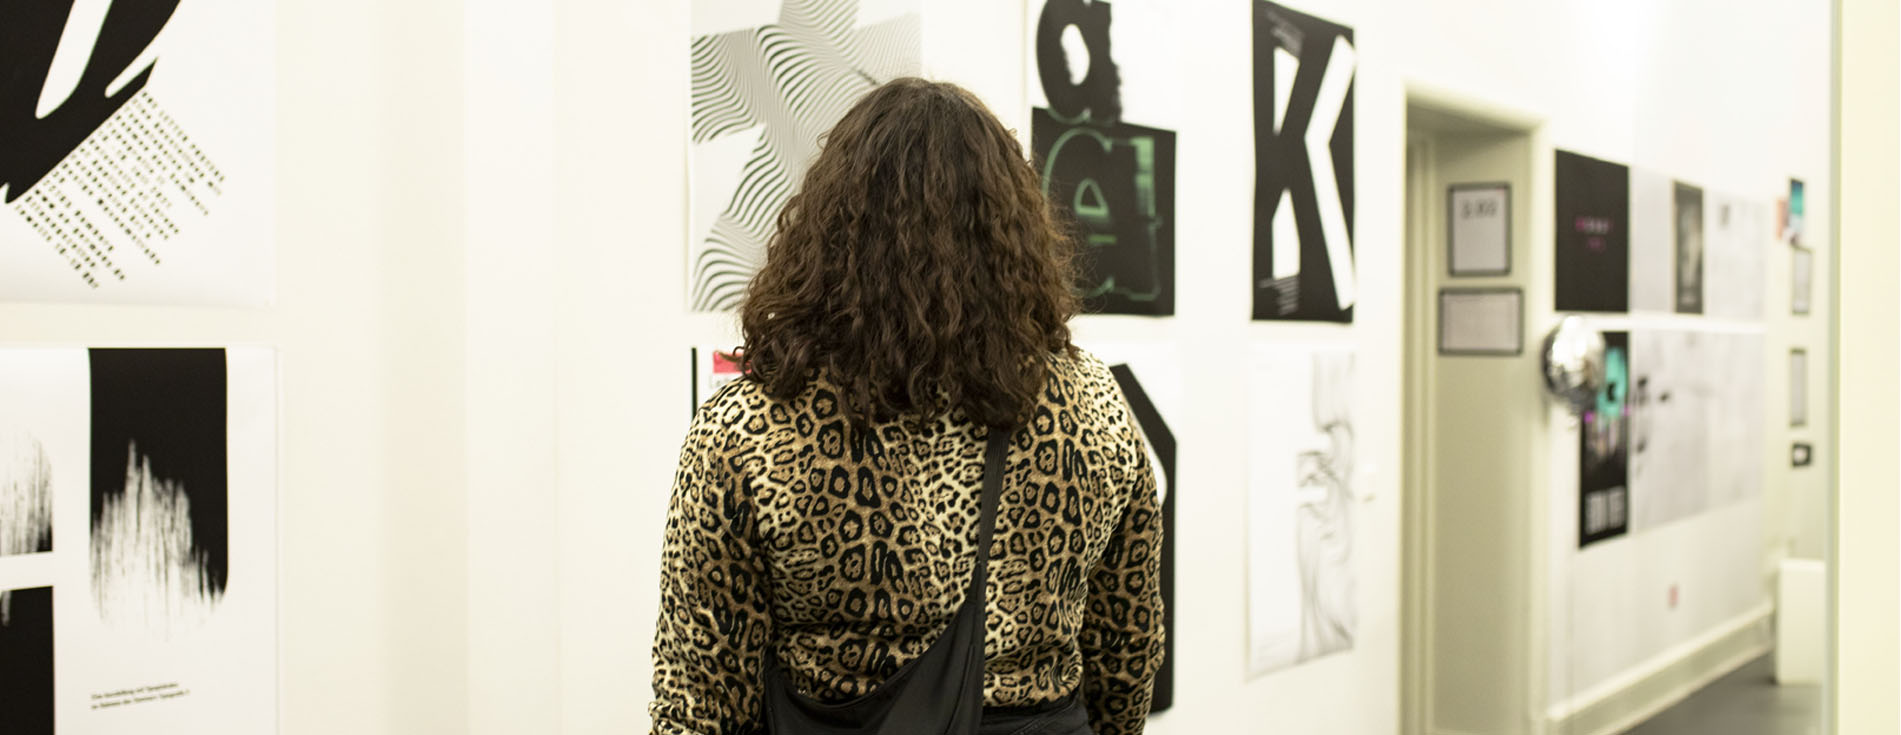 a girl with animal print shirt standing in front of a wall of graphic design poster